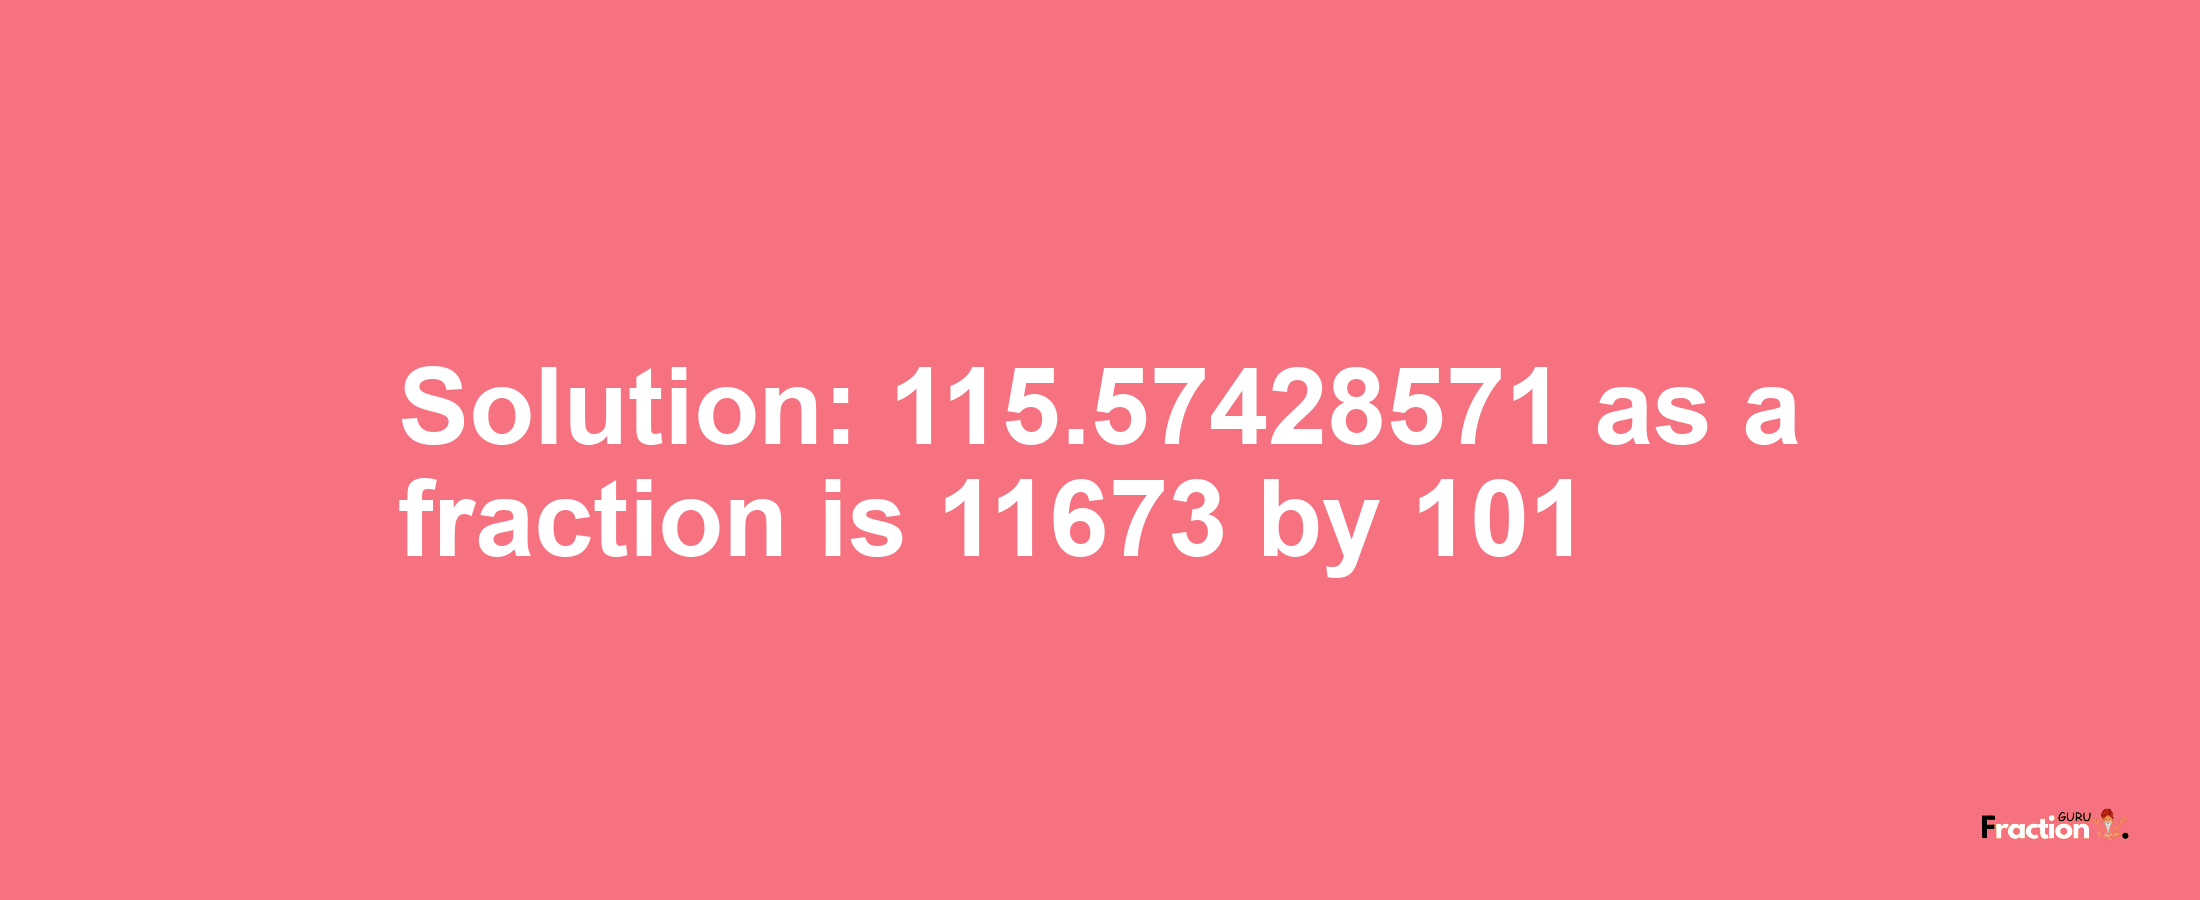 Solution:115.57428571 as a fraction is 11673/101